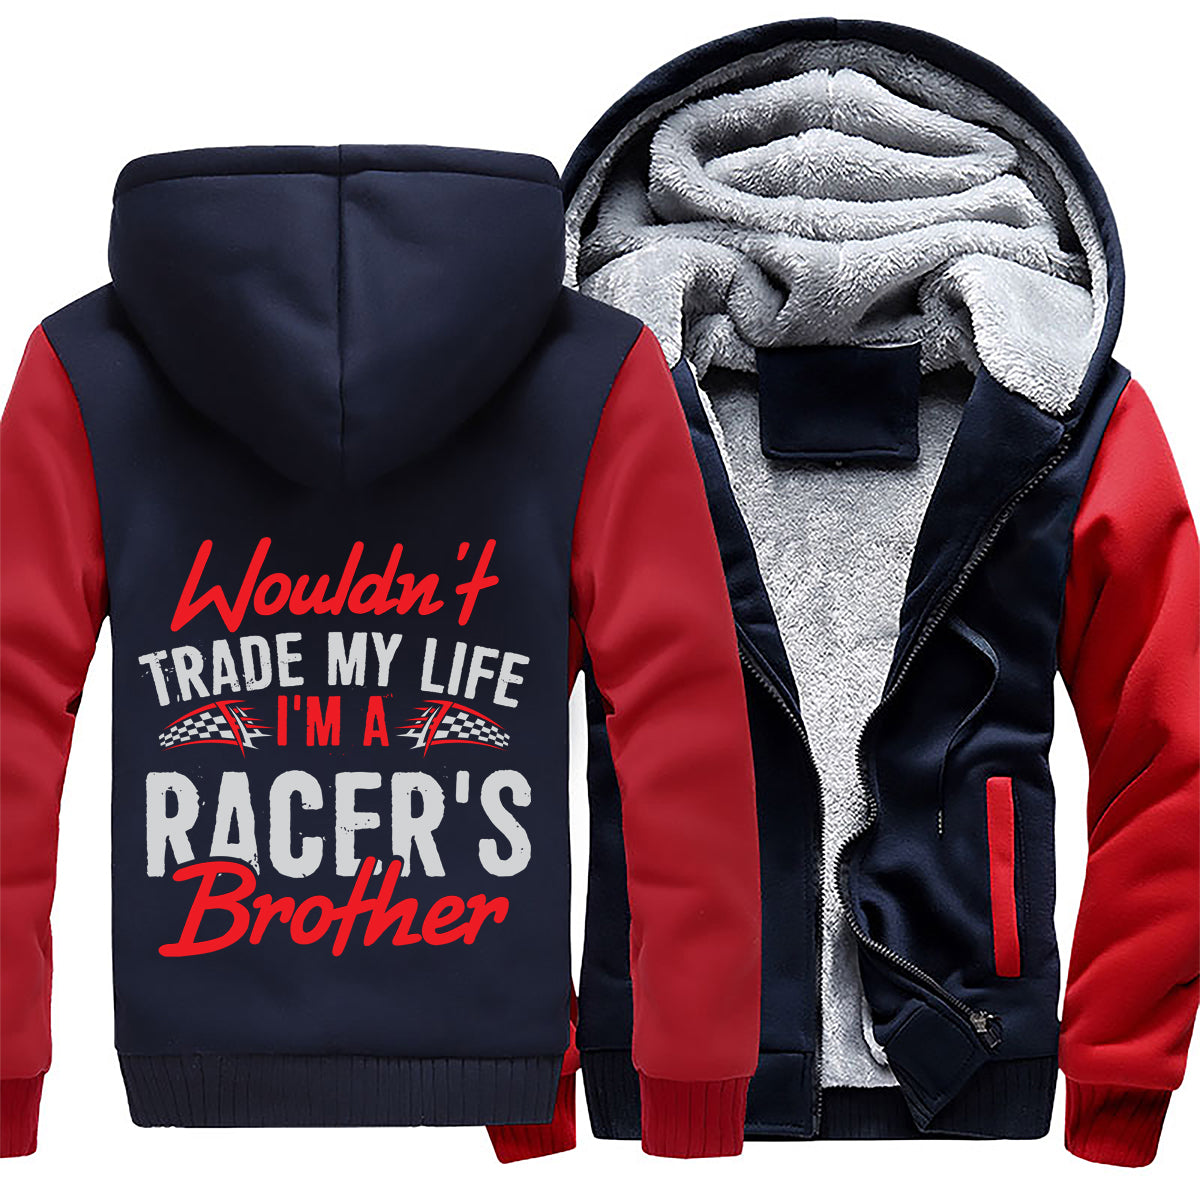 I'm A Racer's Brother Jackets